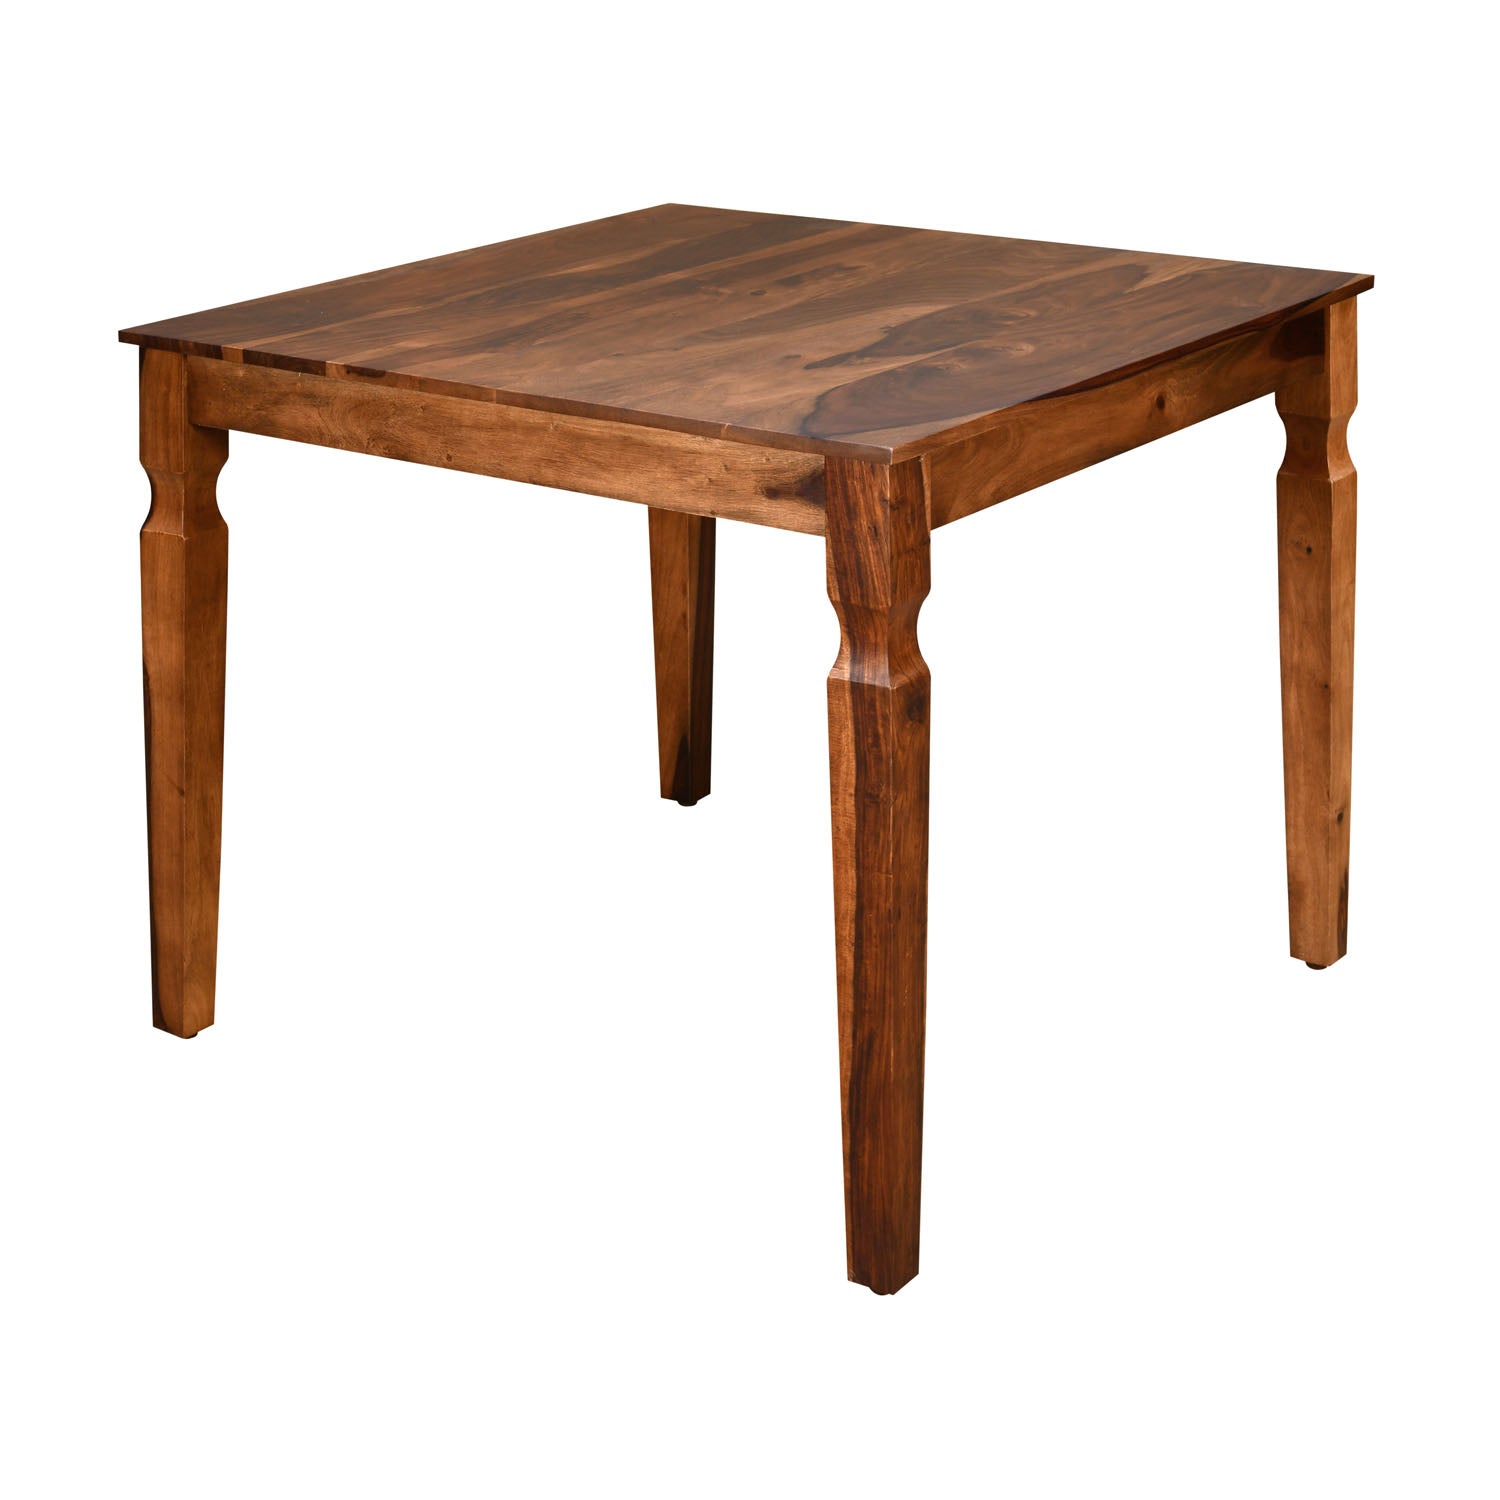 Europa Solid Wood 4 Steater Square Dining Table Set (Walnut)